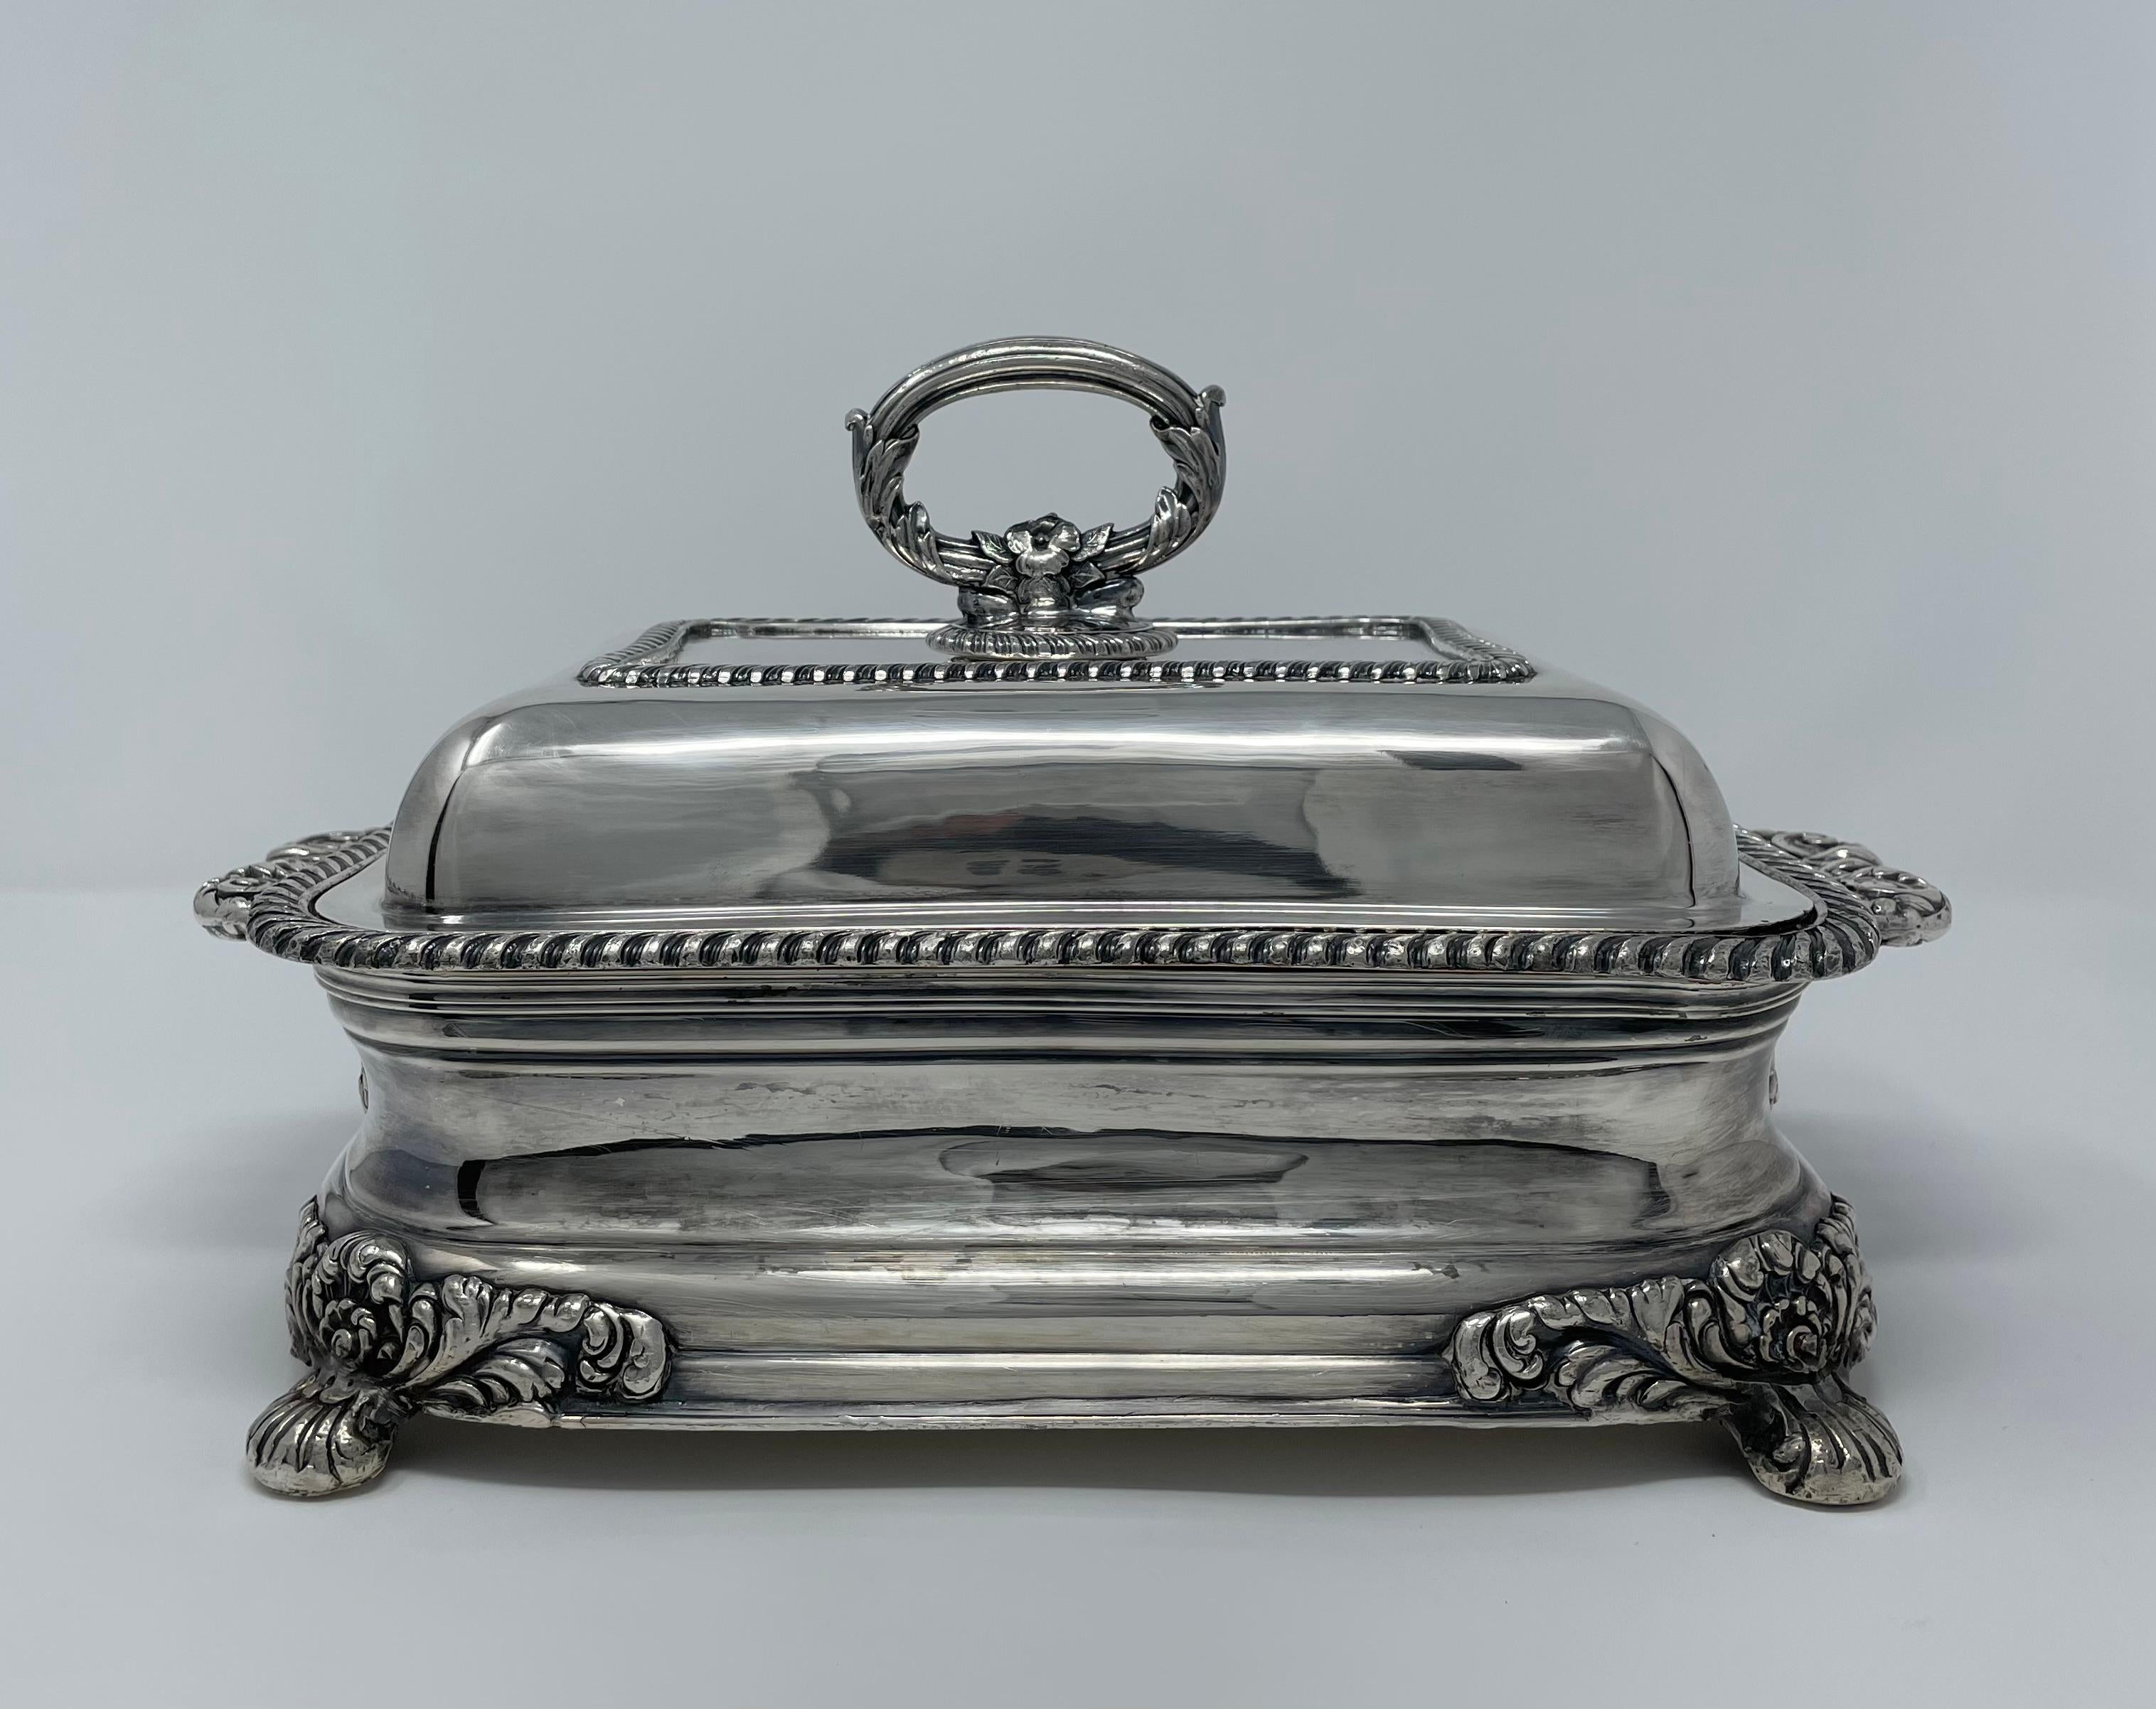 Pair of Antique English Silver-Plated Entree Dishes, circa 1830-40.